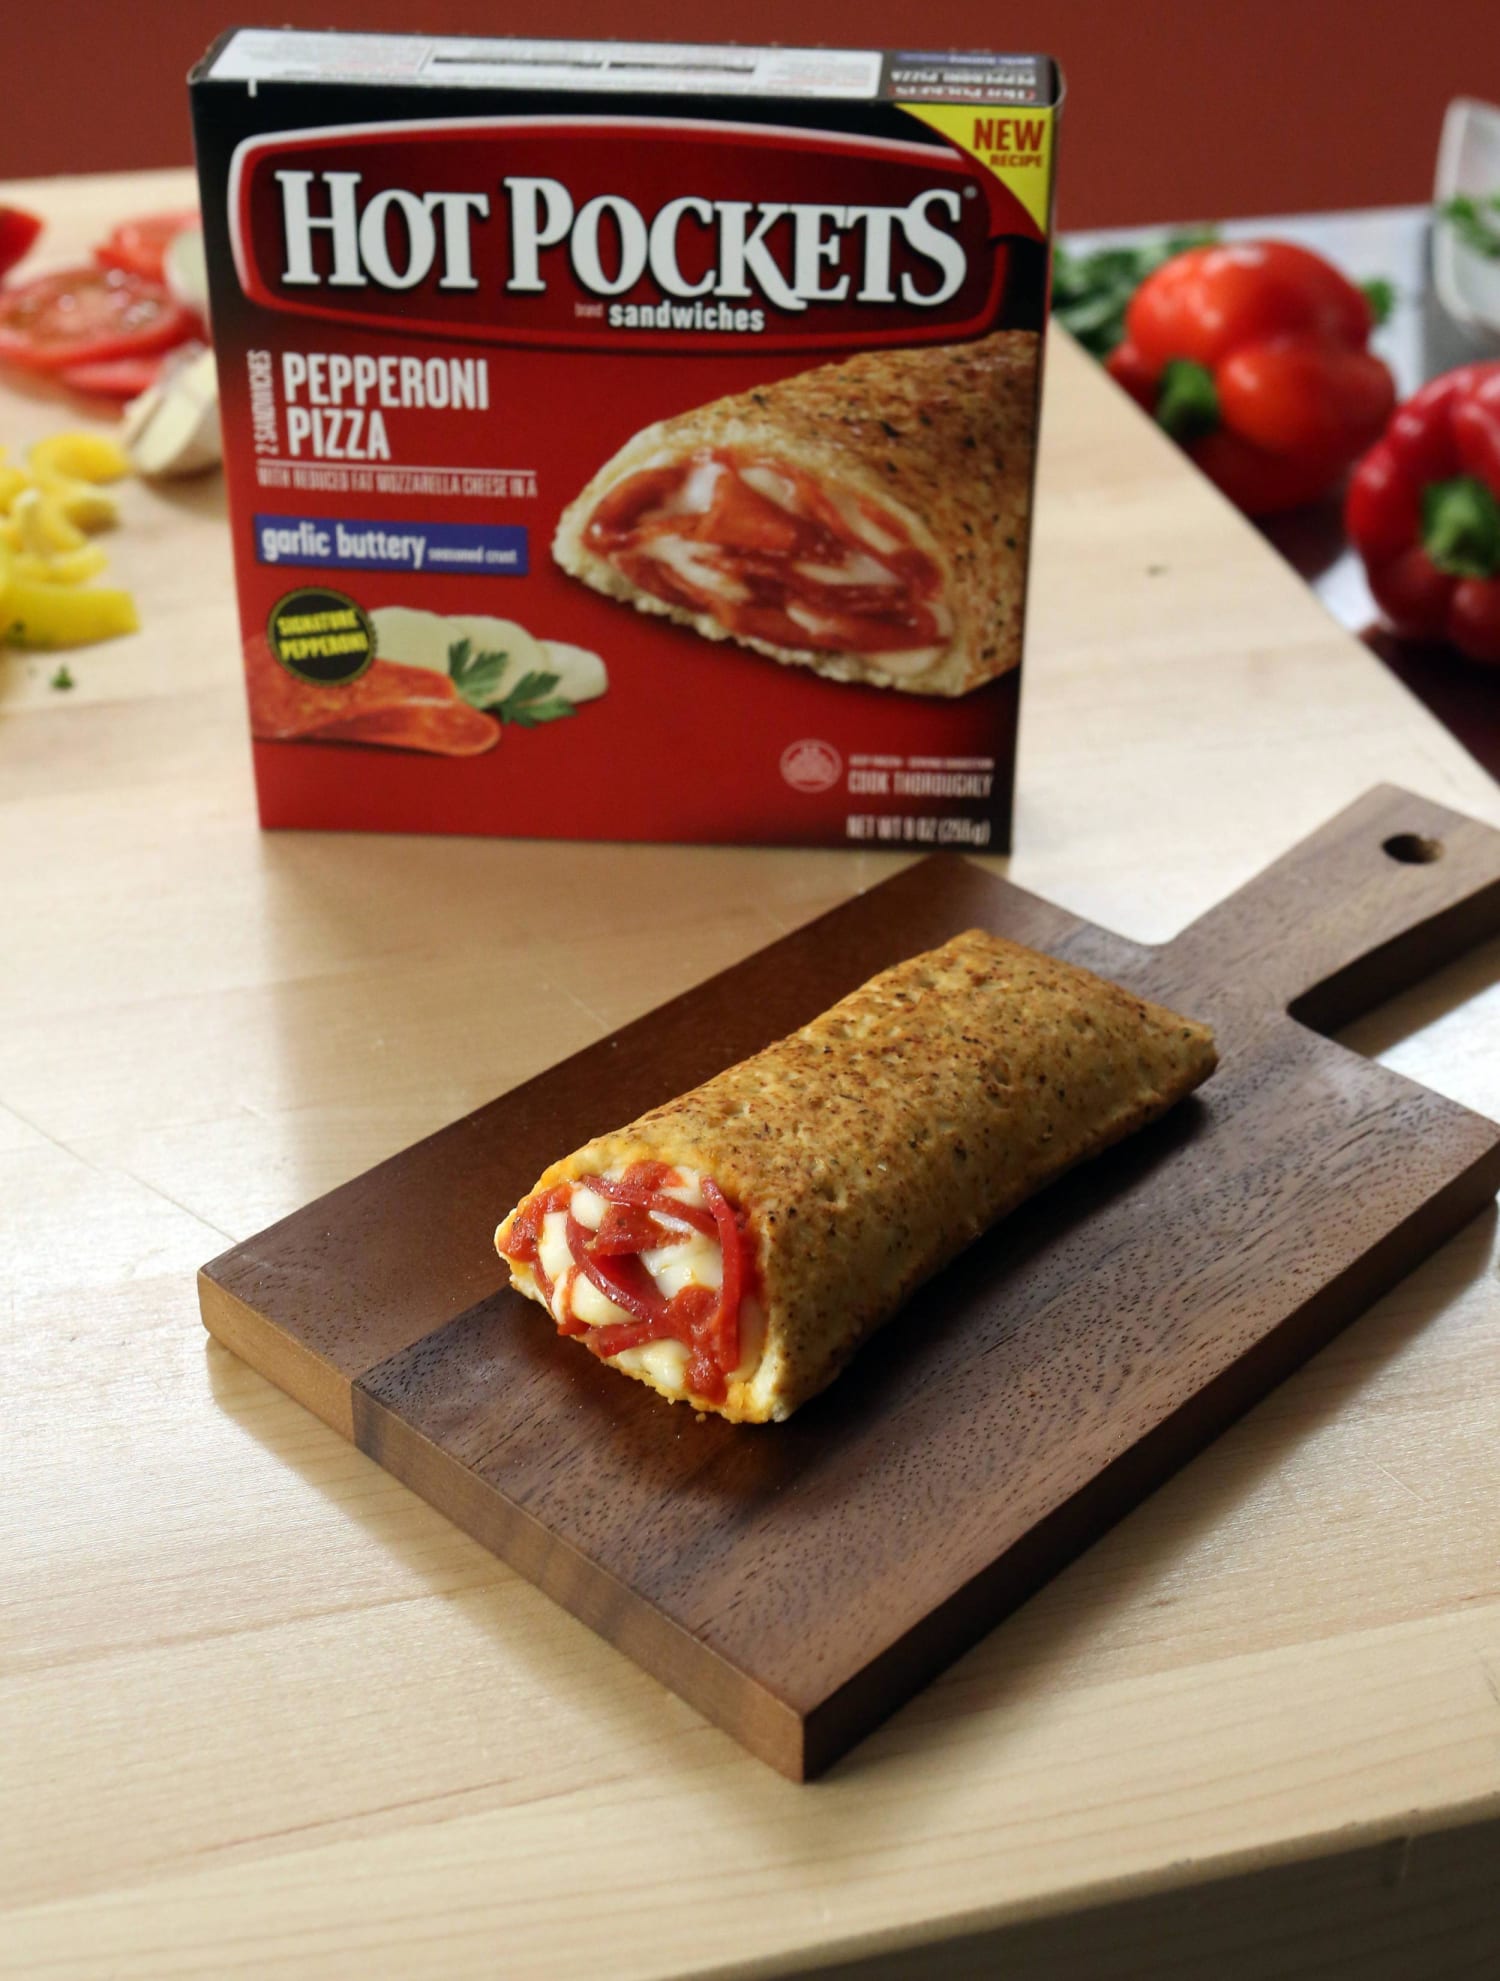 Hot Pockets Included in Massive Meat Recall.